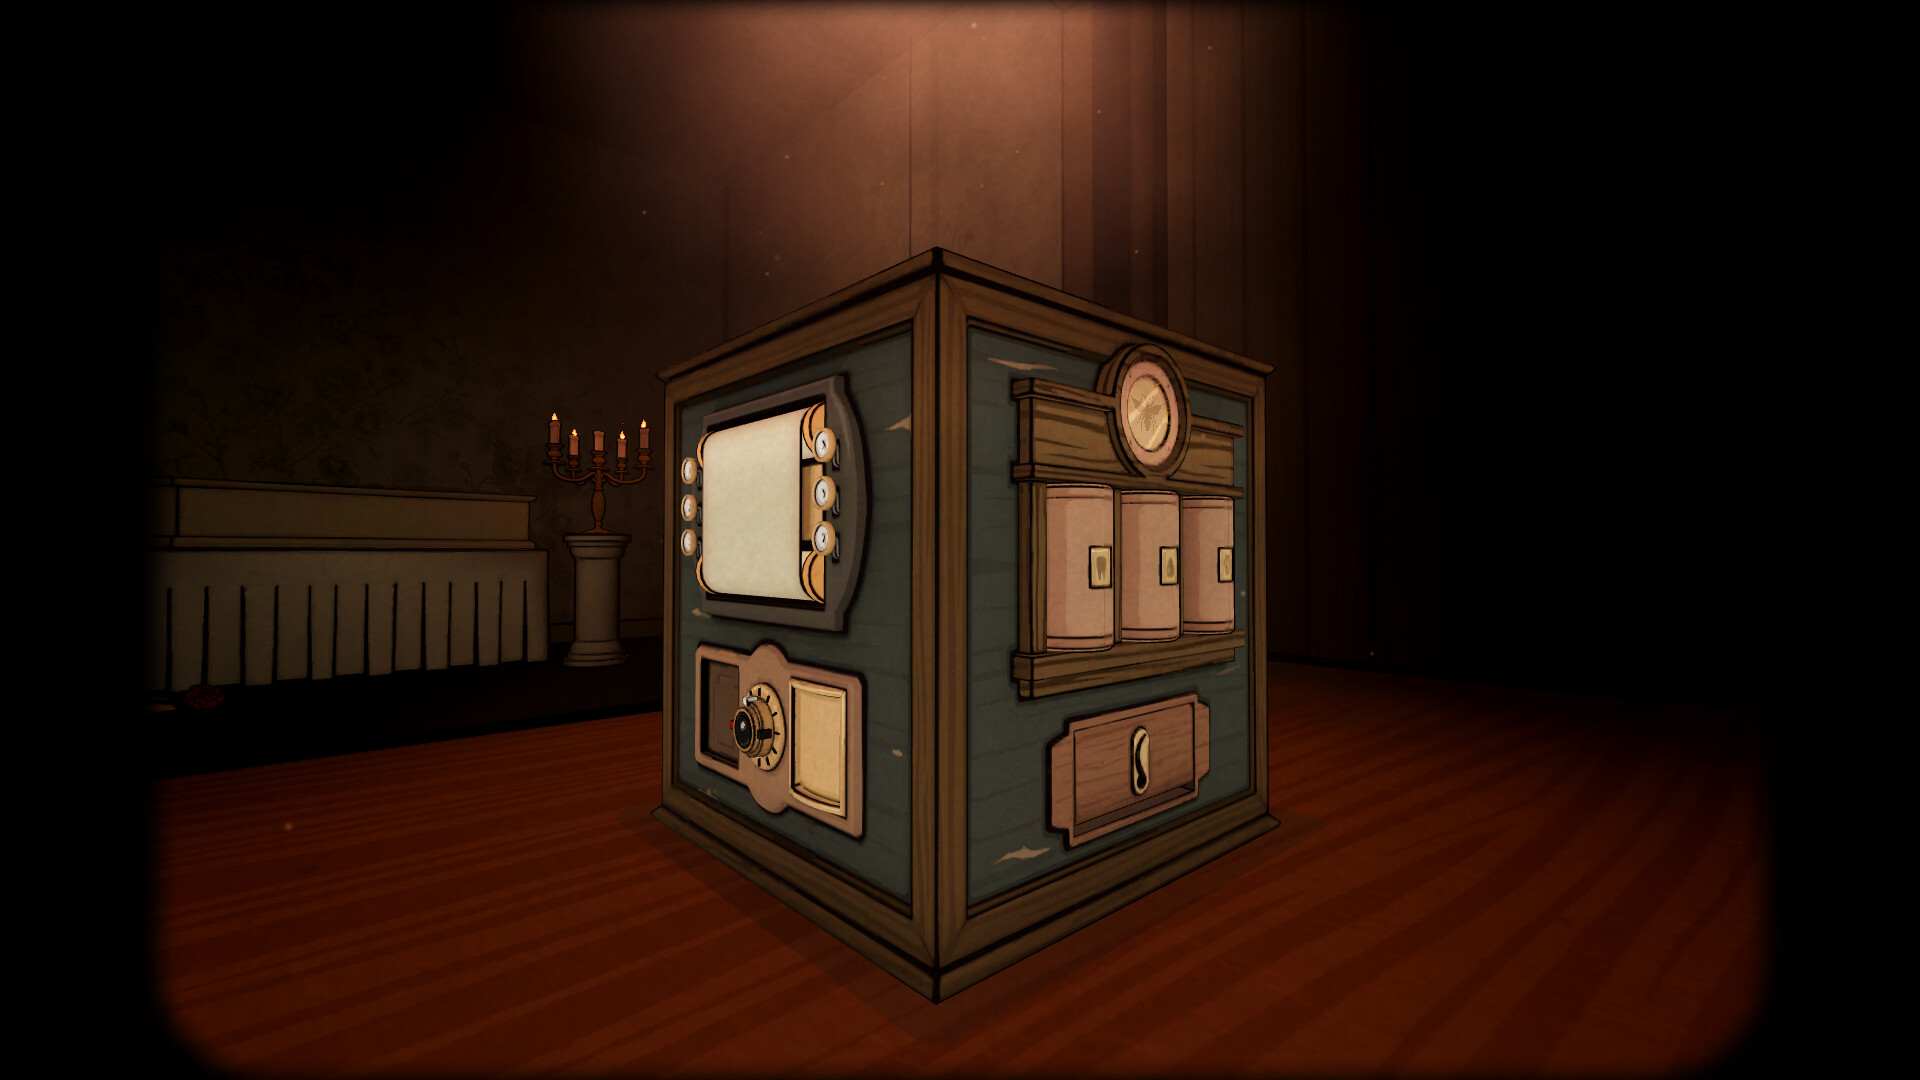 Unsolved case is a short co-op puzzle game. First game in the 5